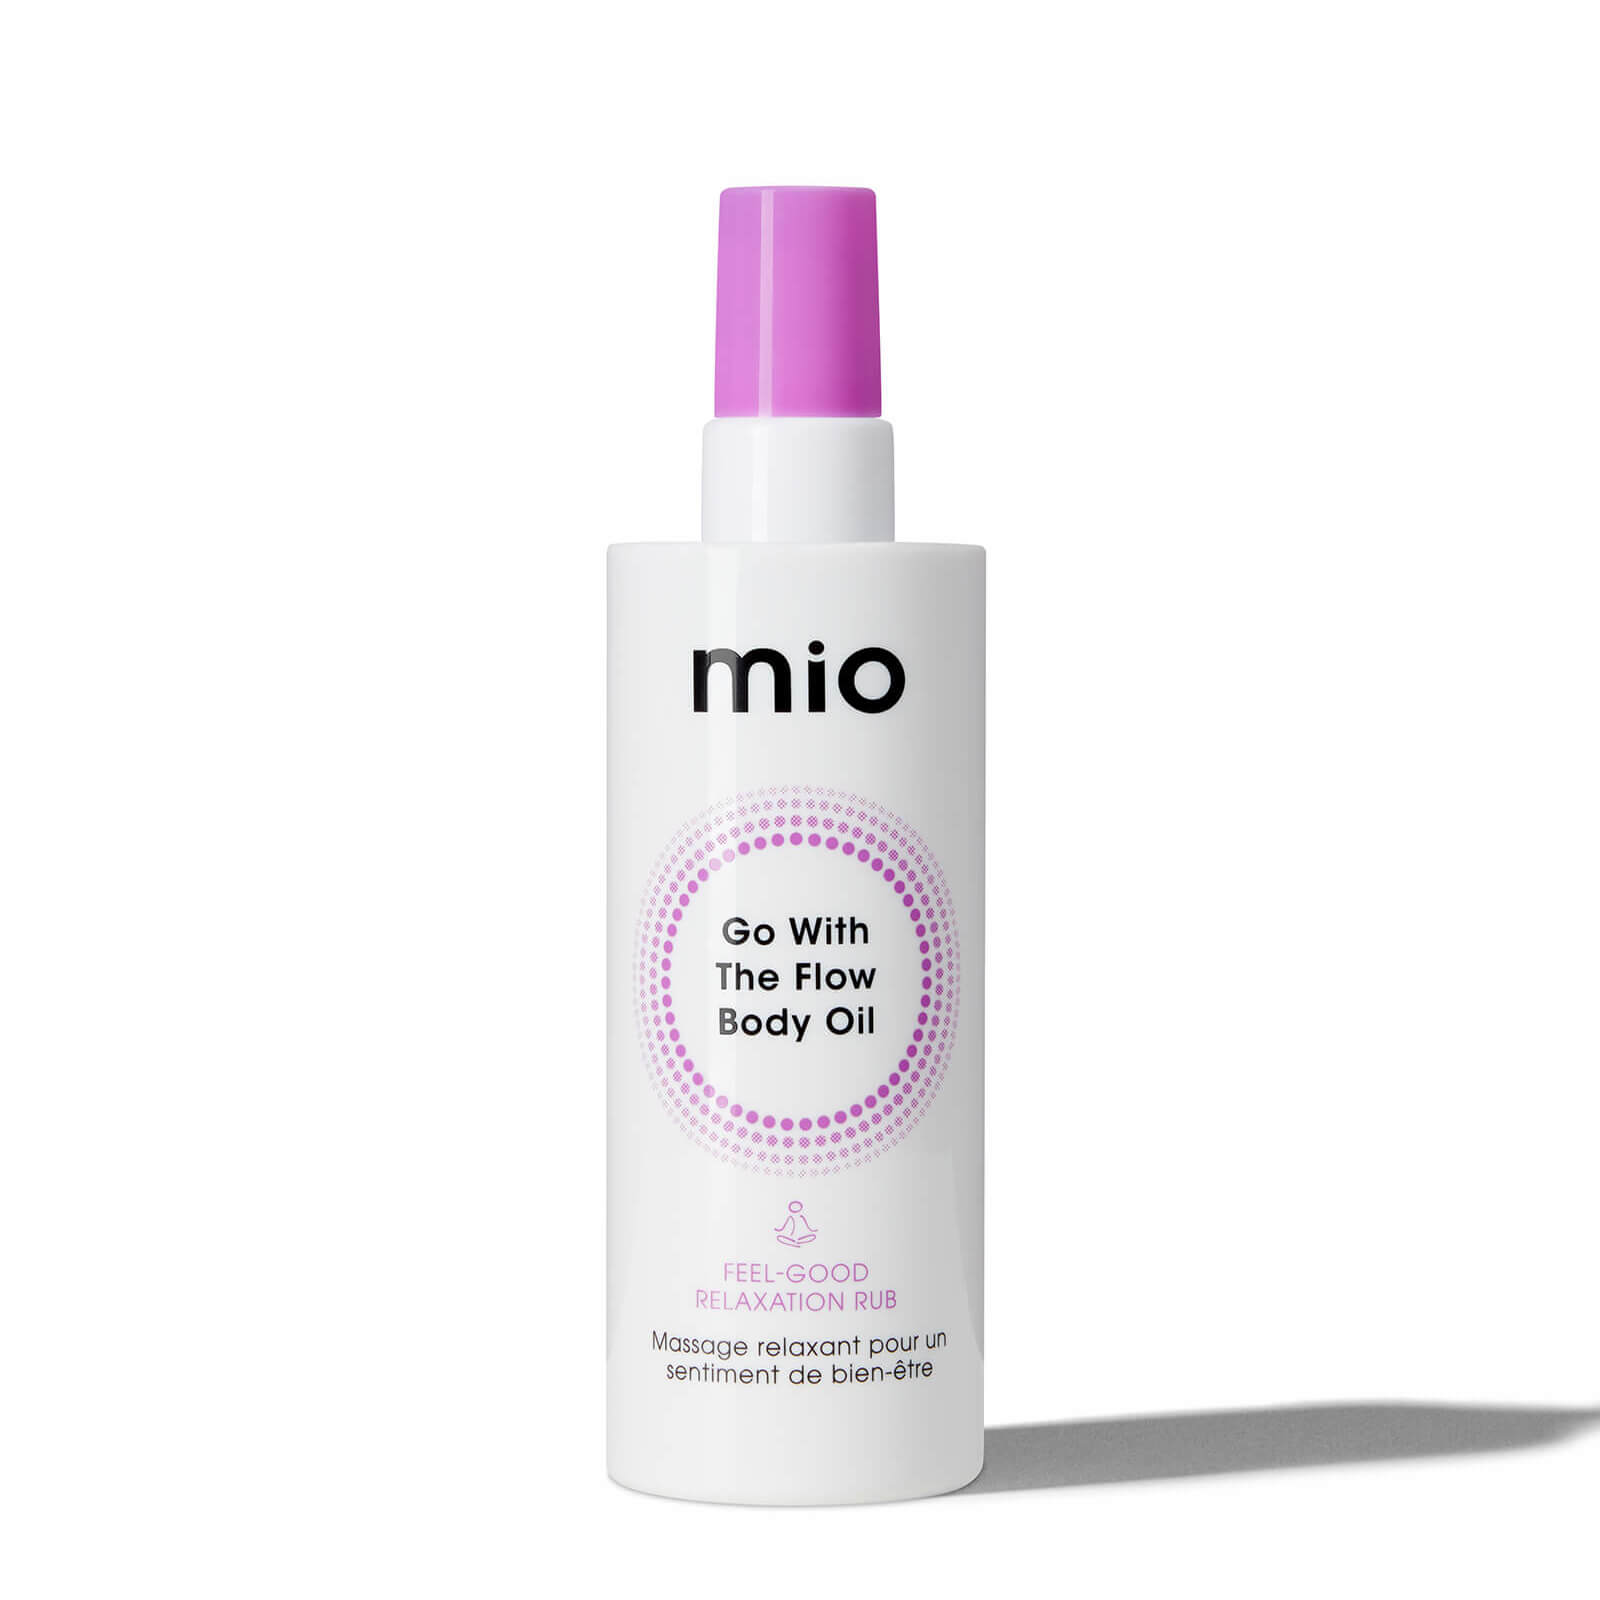 mio Go With The Flow Calming Body Oil 130ml